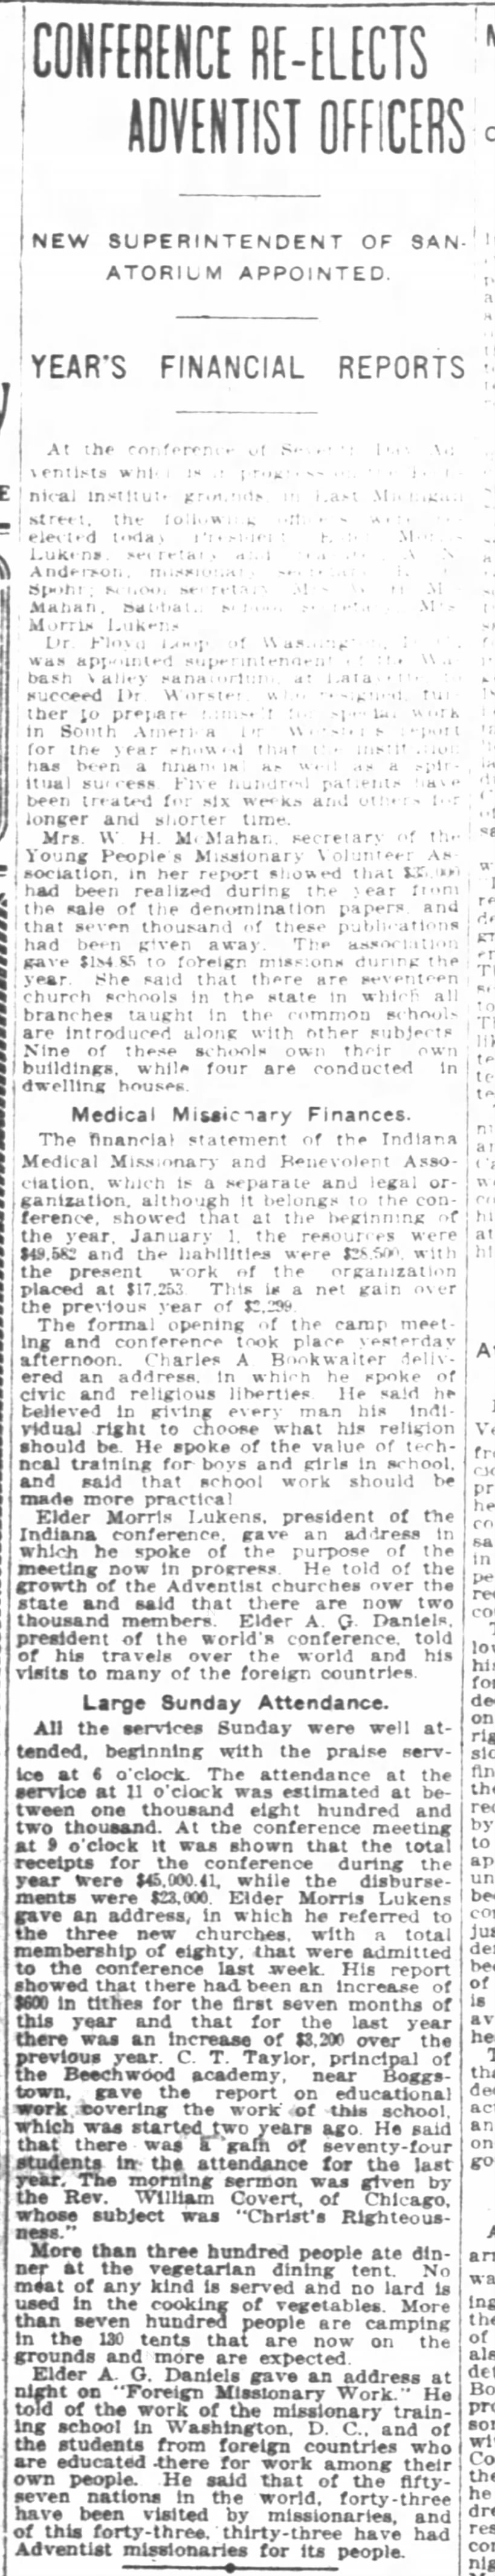 "Conference Re-elects Adventist Officers", Indianapolis News, 1910